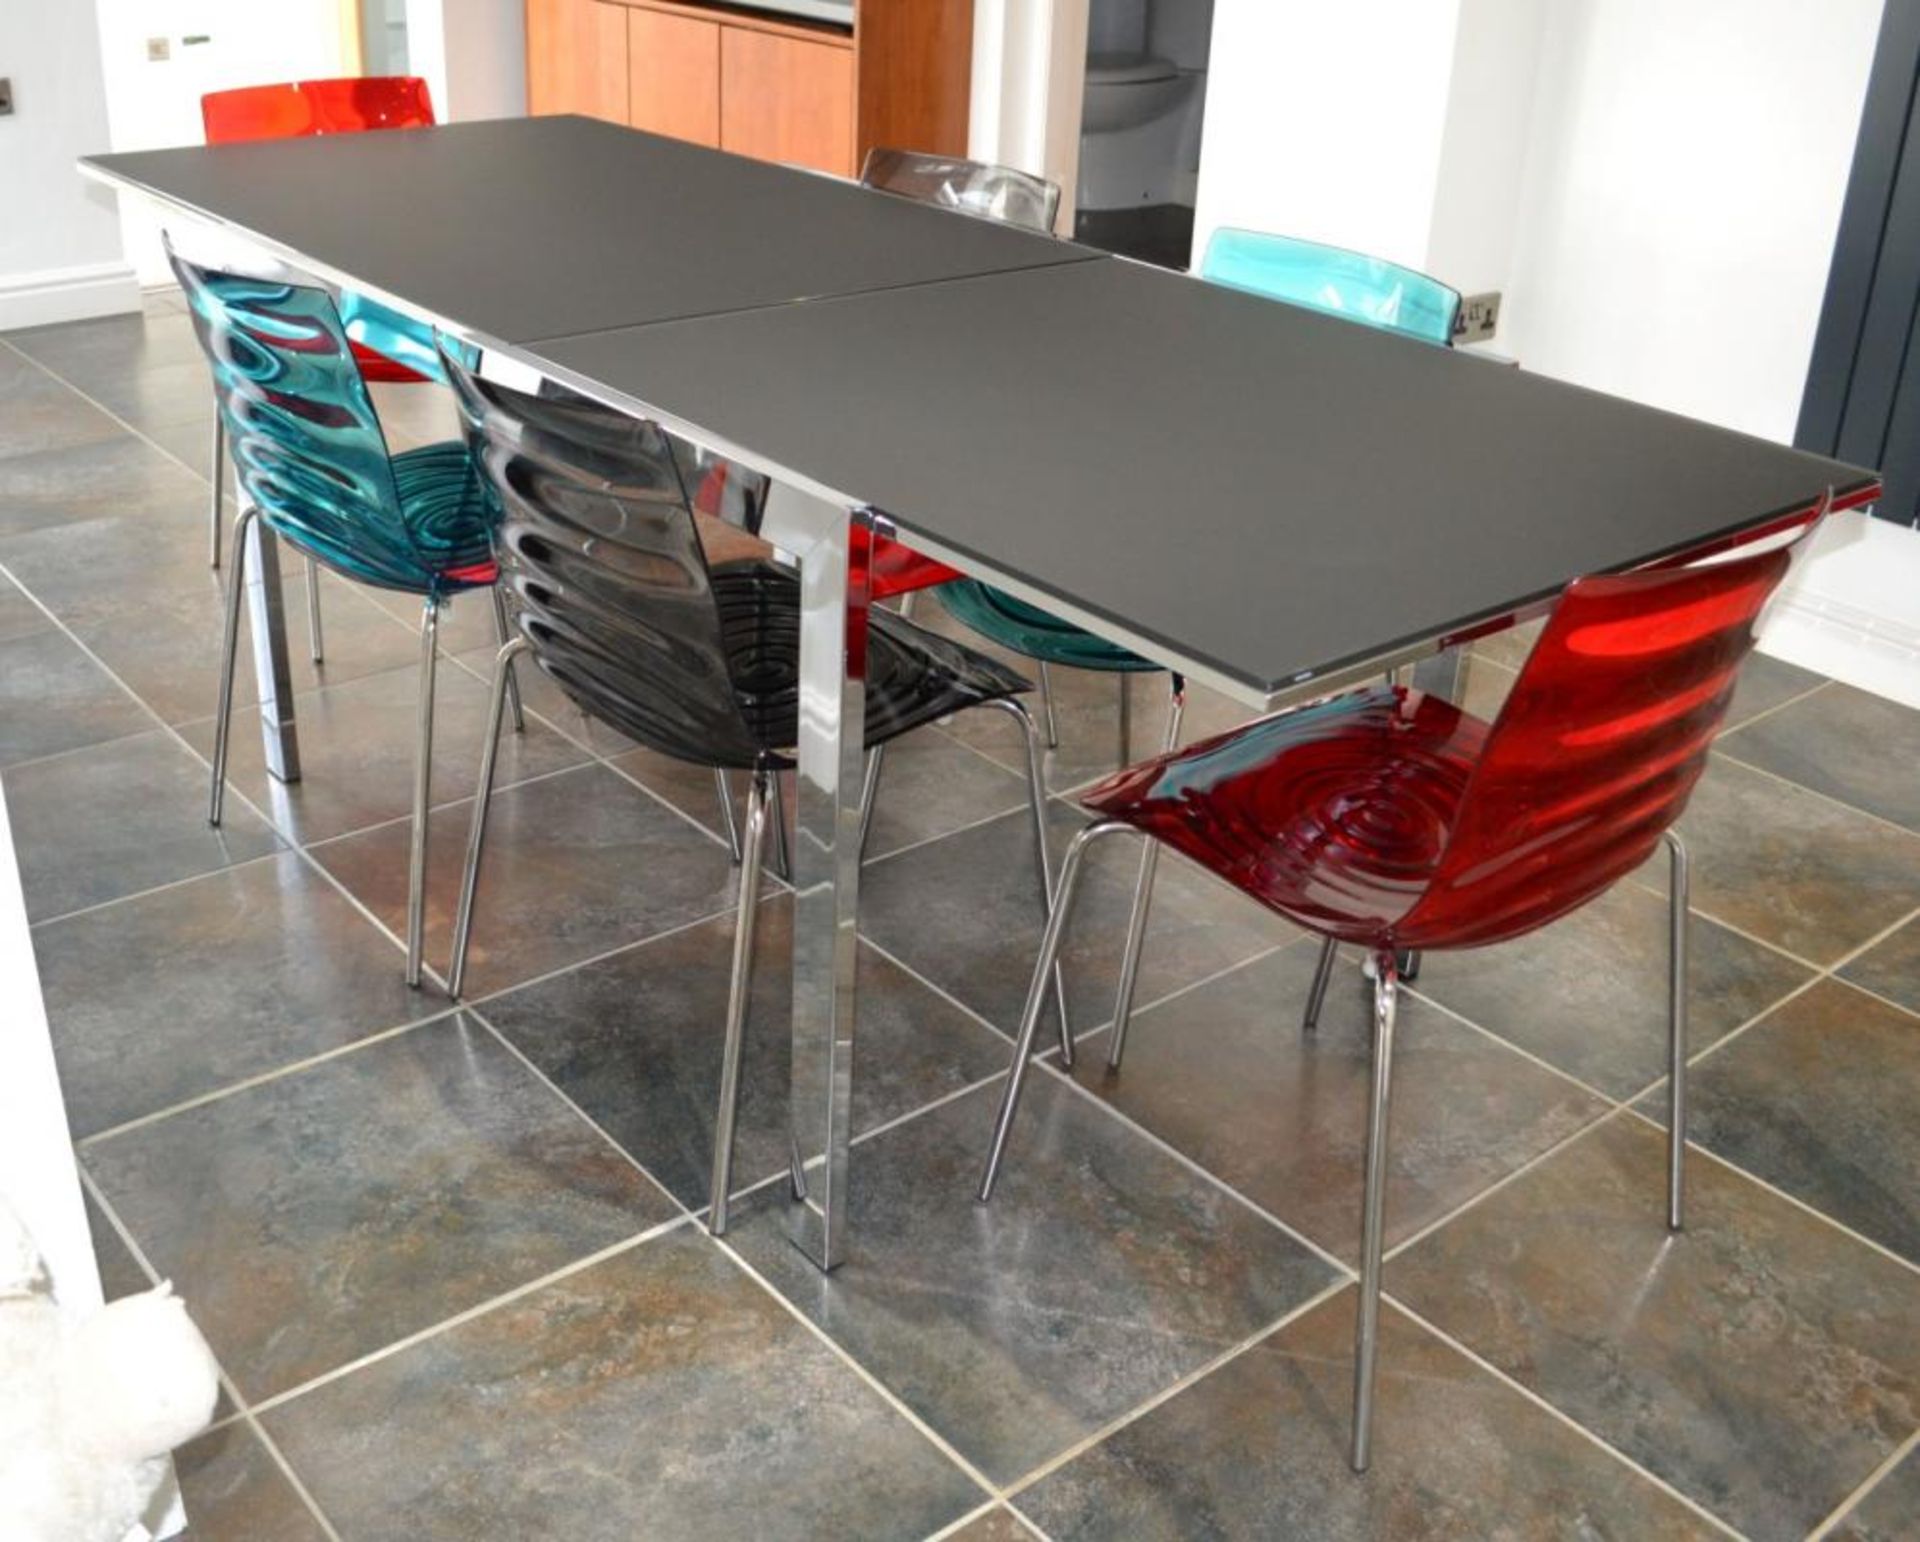 1 x Contemporary Calligaris Frosted Black Glass Extending Dining Table With 6 L&#39;Eau Chairs - CL2 - Image 2 of 14